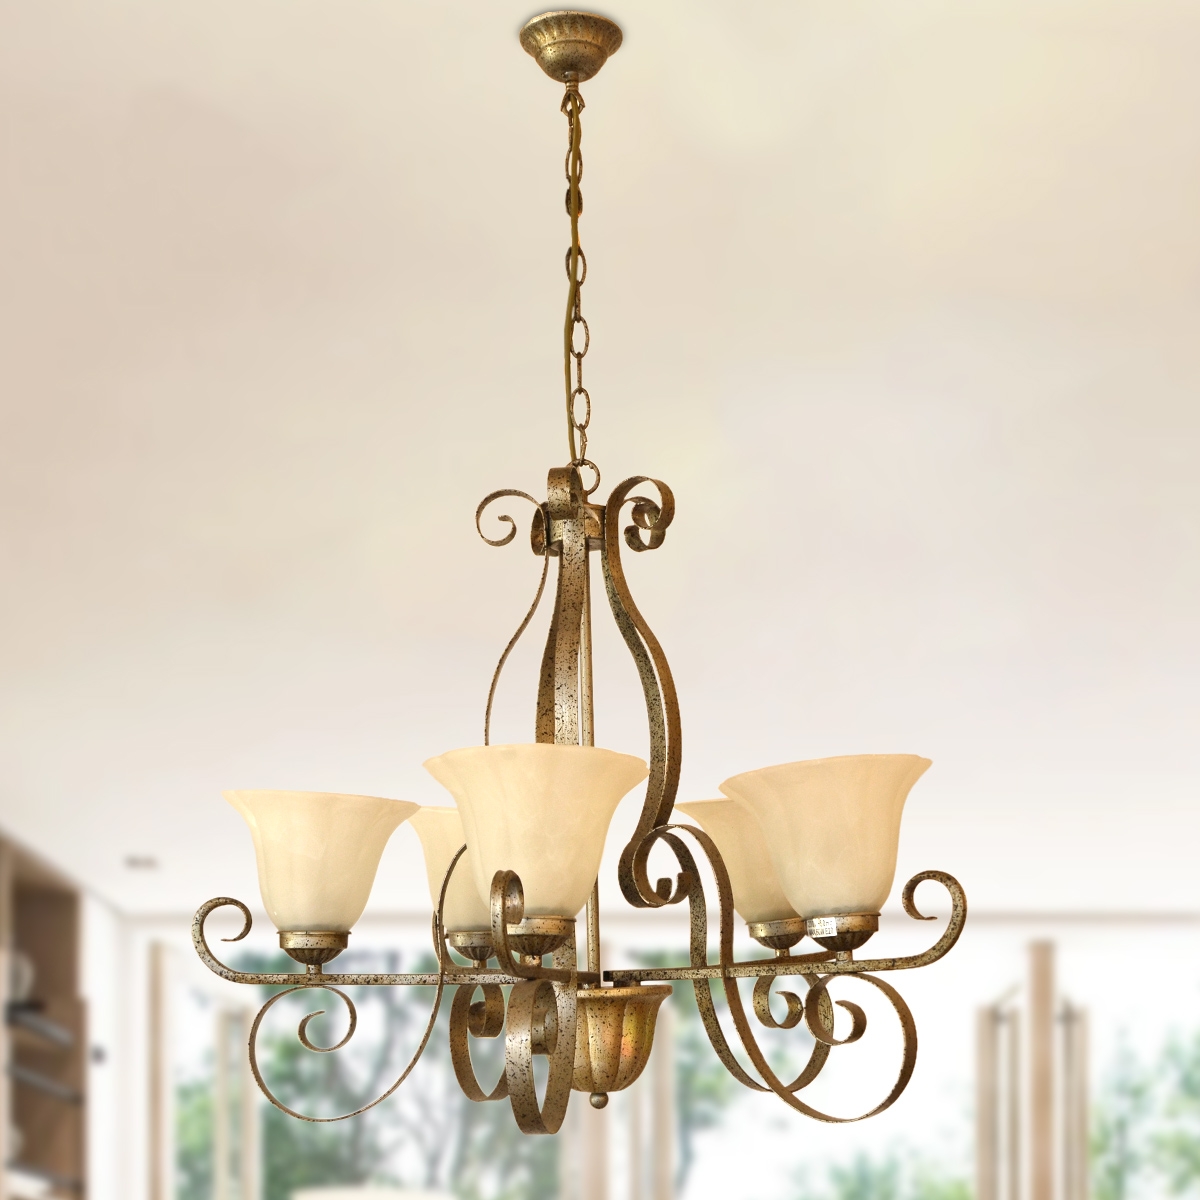 Uplight Chandelier 5 Arms HLH-21485 - Brass